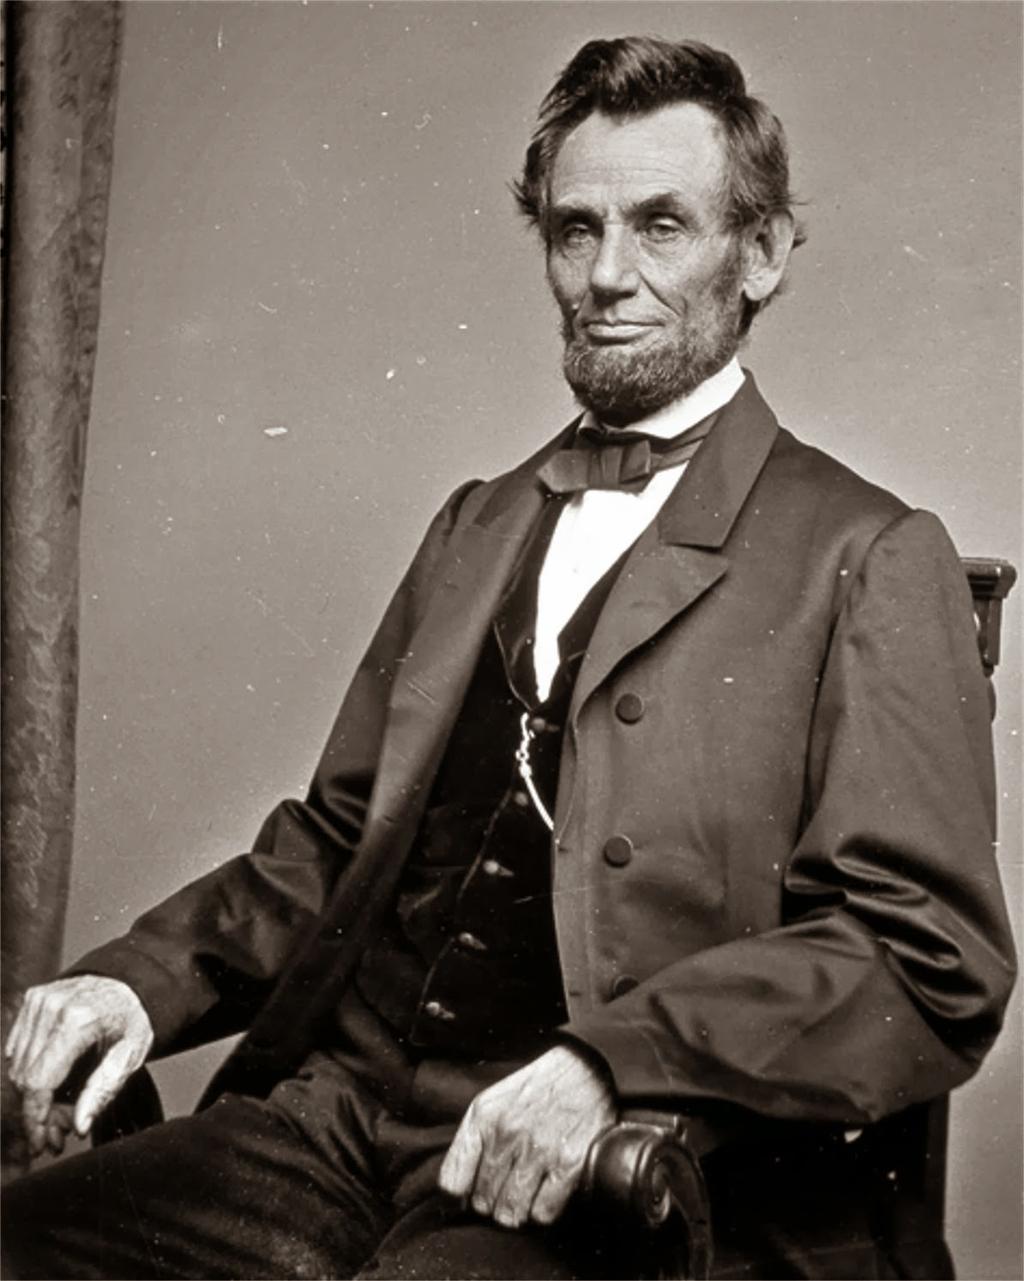 1862) Lincoln decides to move forward with announcing emancipation.